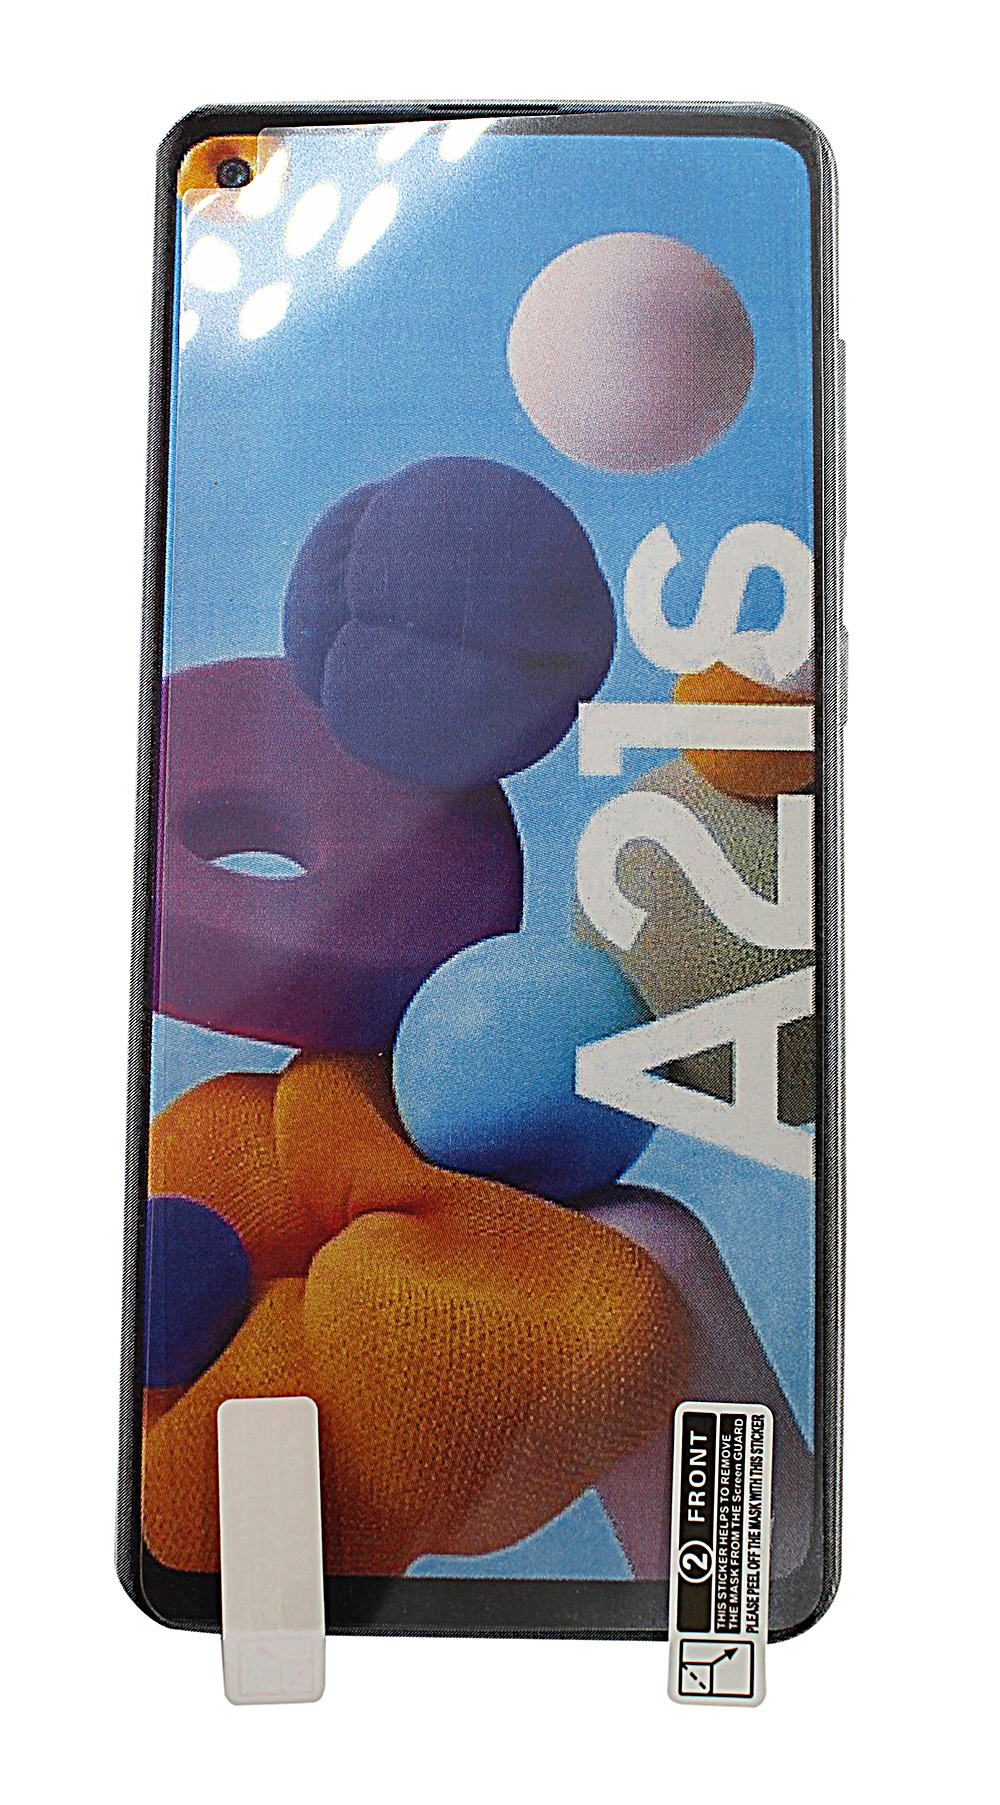 6-Pack Skrmbeskyttelse Samsung Galaxy A21s (A217F/DS)